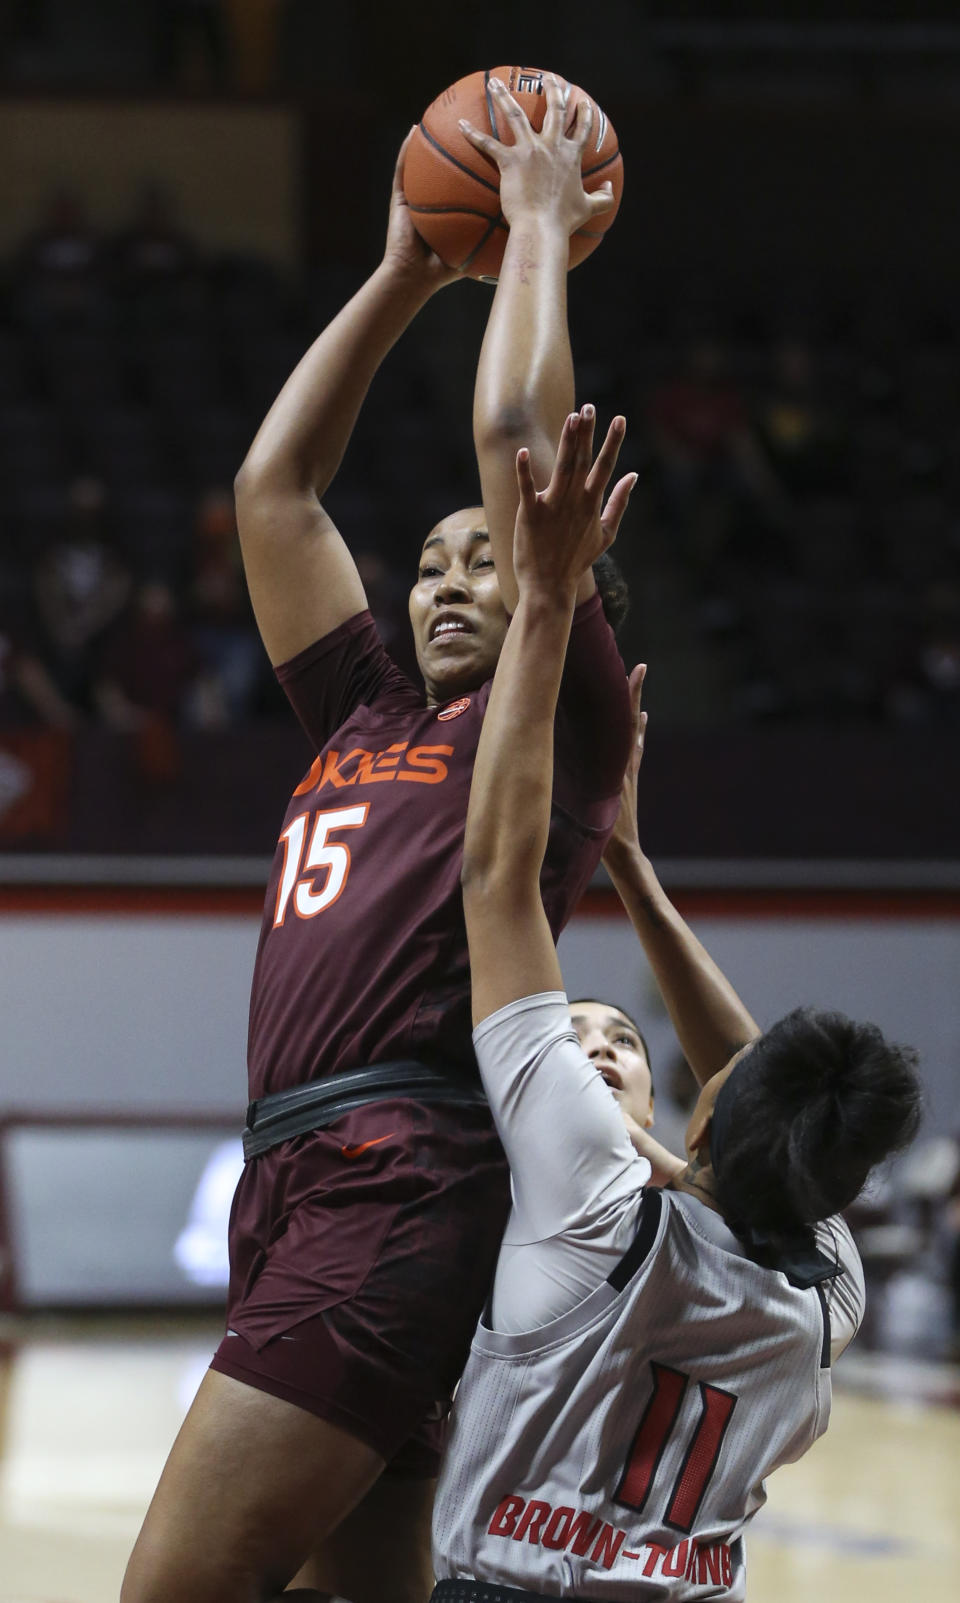 Virginia Tech's Azana Baines (15) grabs an offensive rebound in front of North Carolina State's Jakia Brown-Turner (11) during the first half of an NCAA college basketball game in Blacksburg, Va., Thursday, Jan. 28, 2021. (Matt Gentry/The Roanoke Times via AP, Pool)